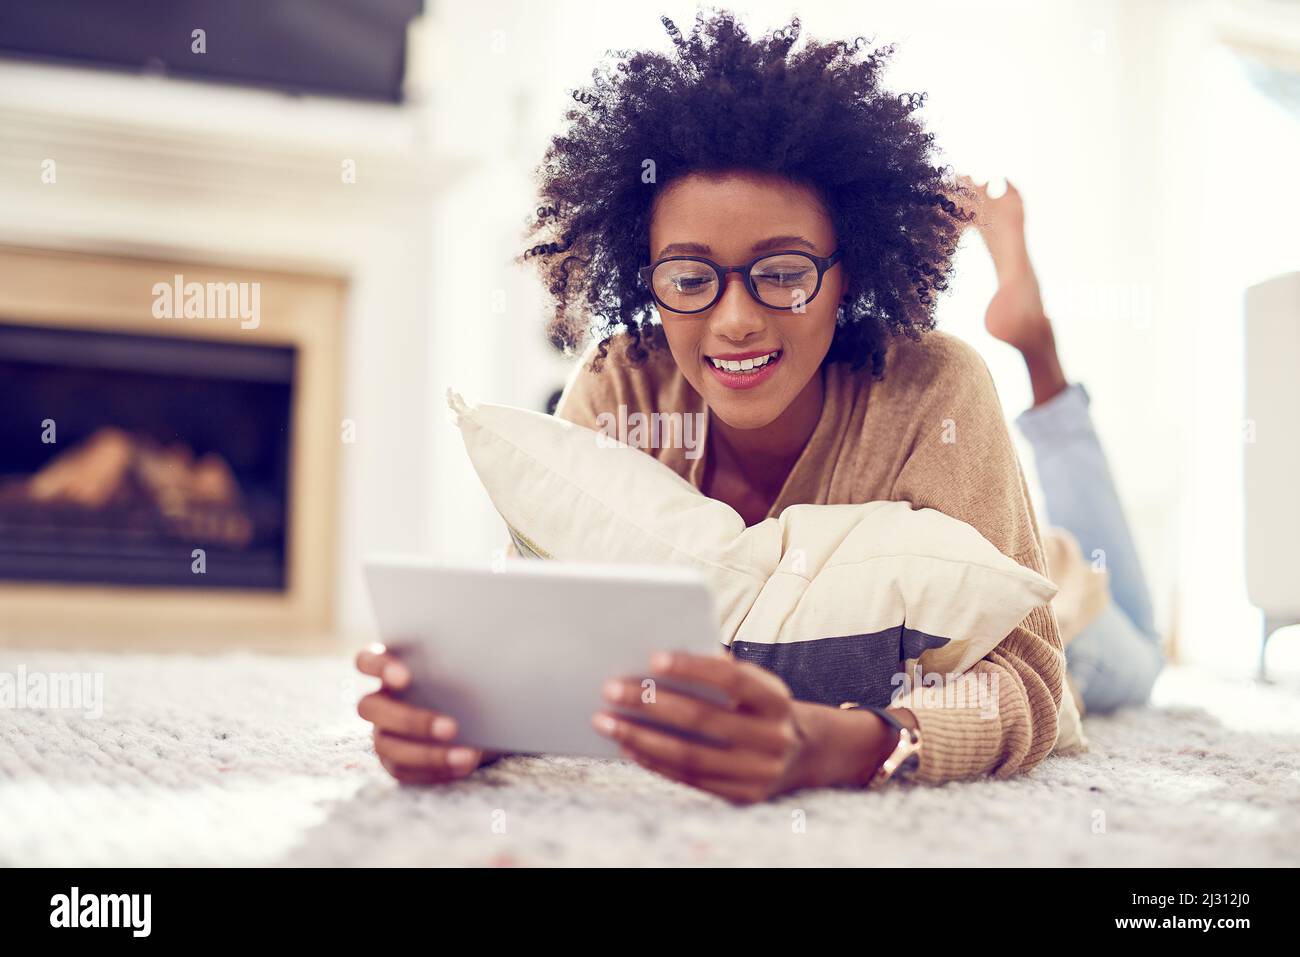 The perfect weekend is just an ebook away. Shot of a young woman using a digital tablet at home. Stock Photo